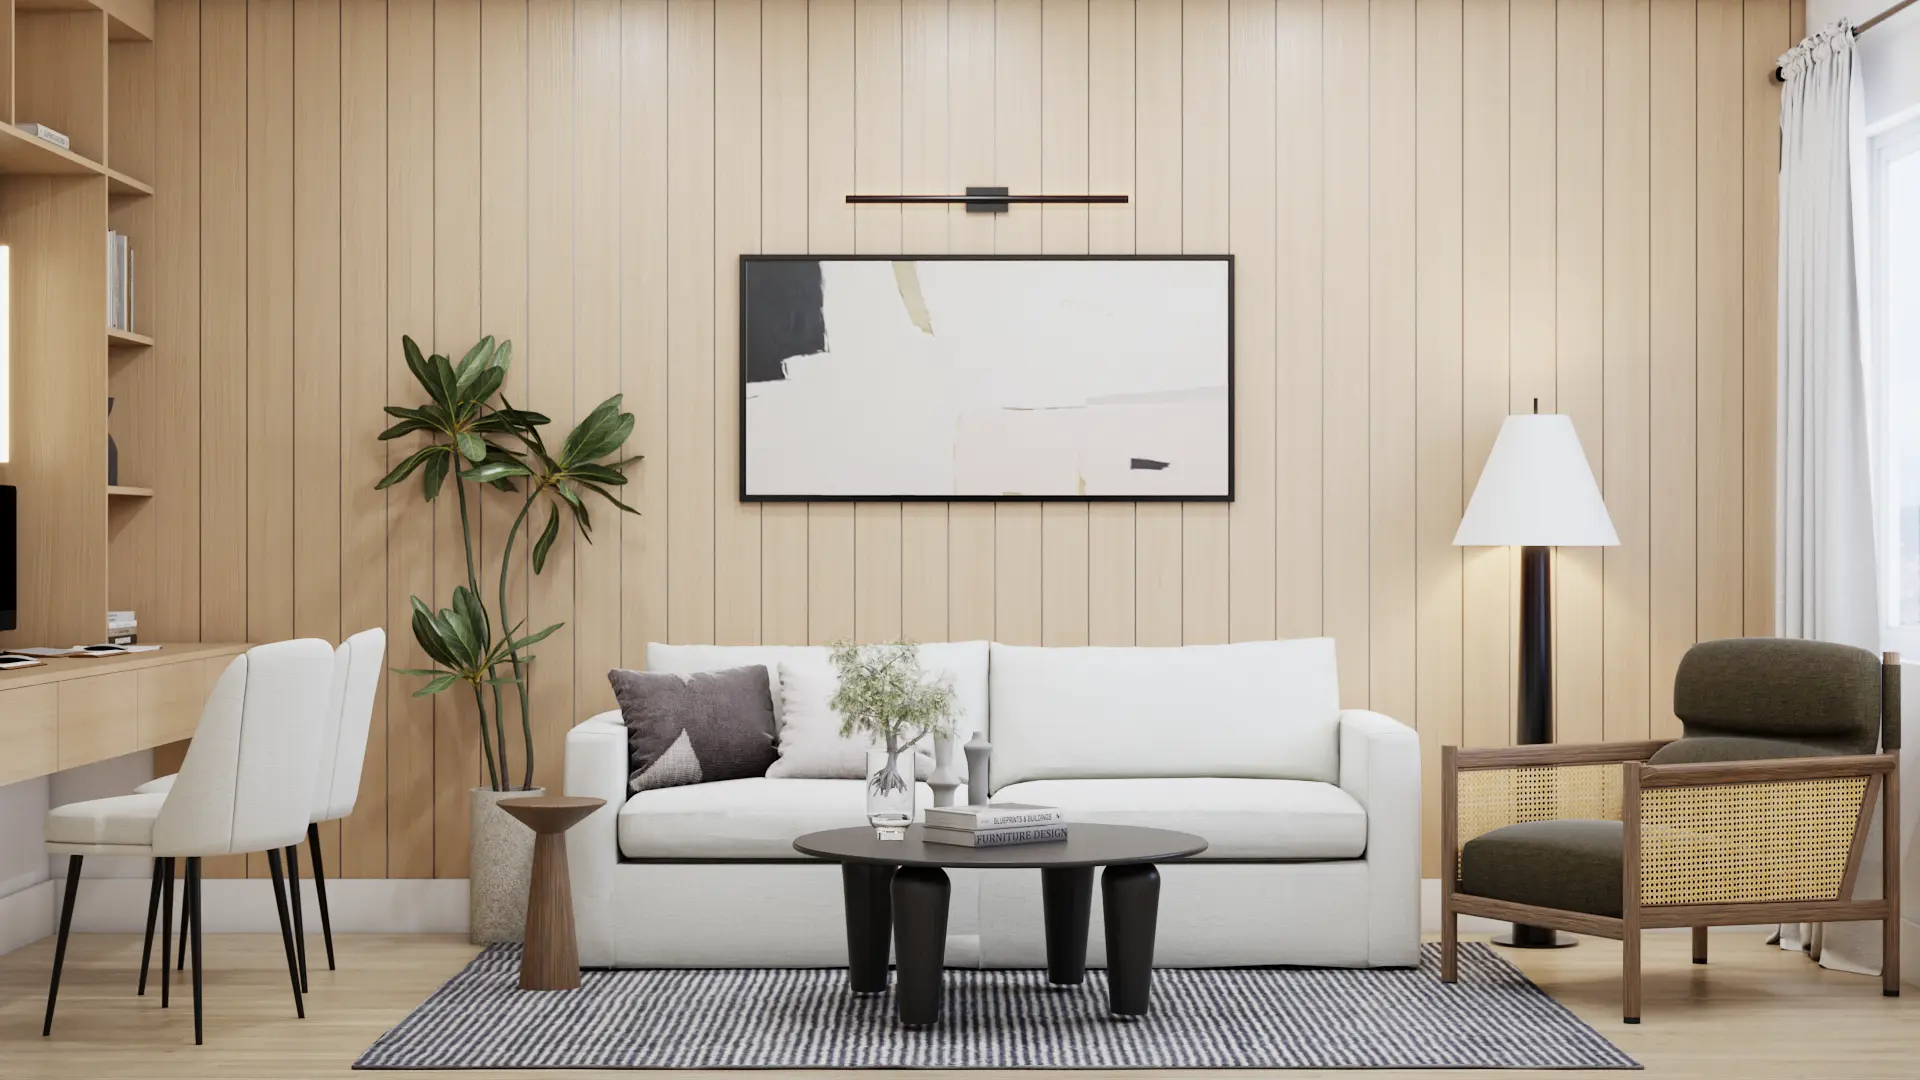 Minimalist living room with sleek white sofa and abstract artwork, set against a wooden panel backdrop. Interior design by Debora, enhancing spaces with art.